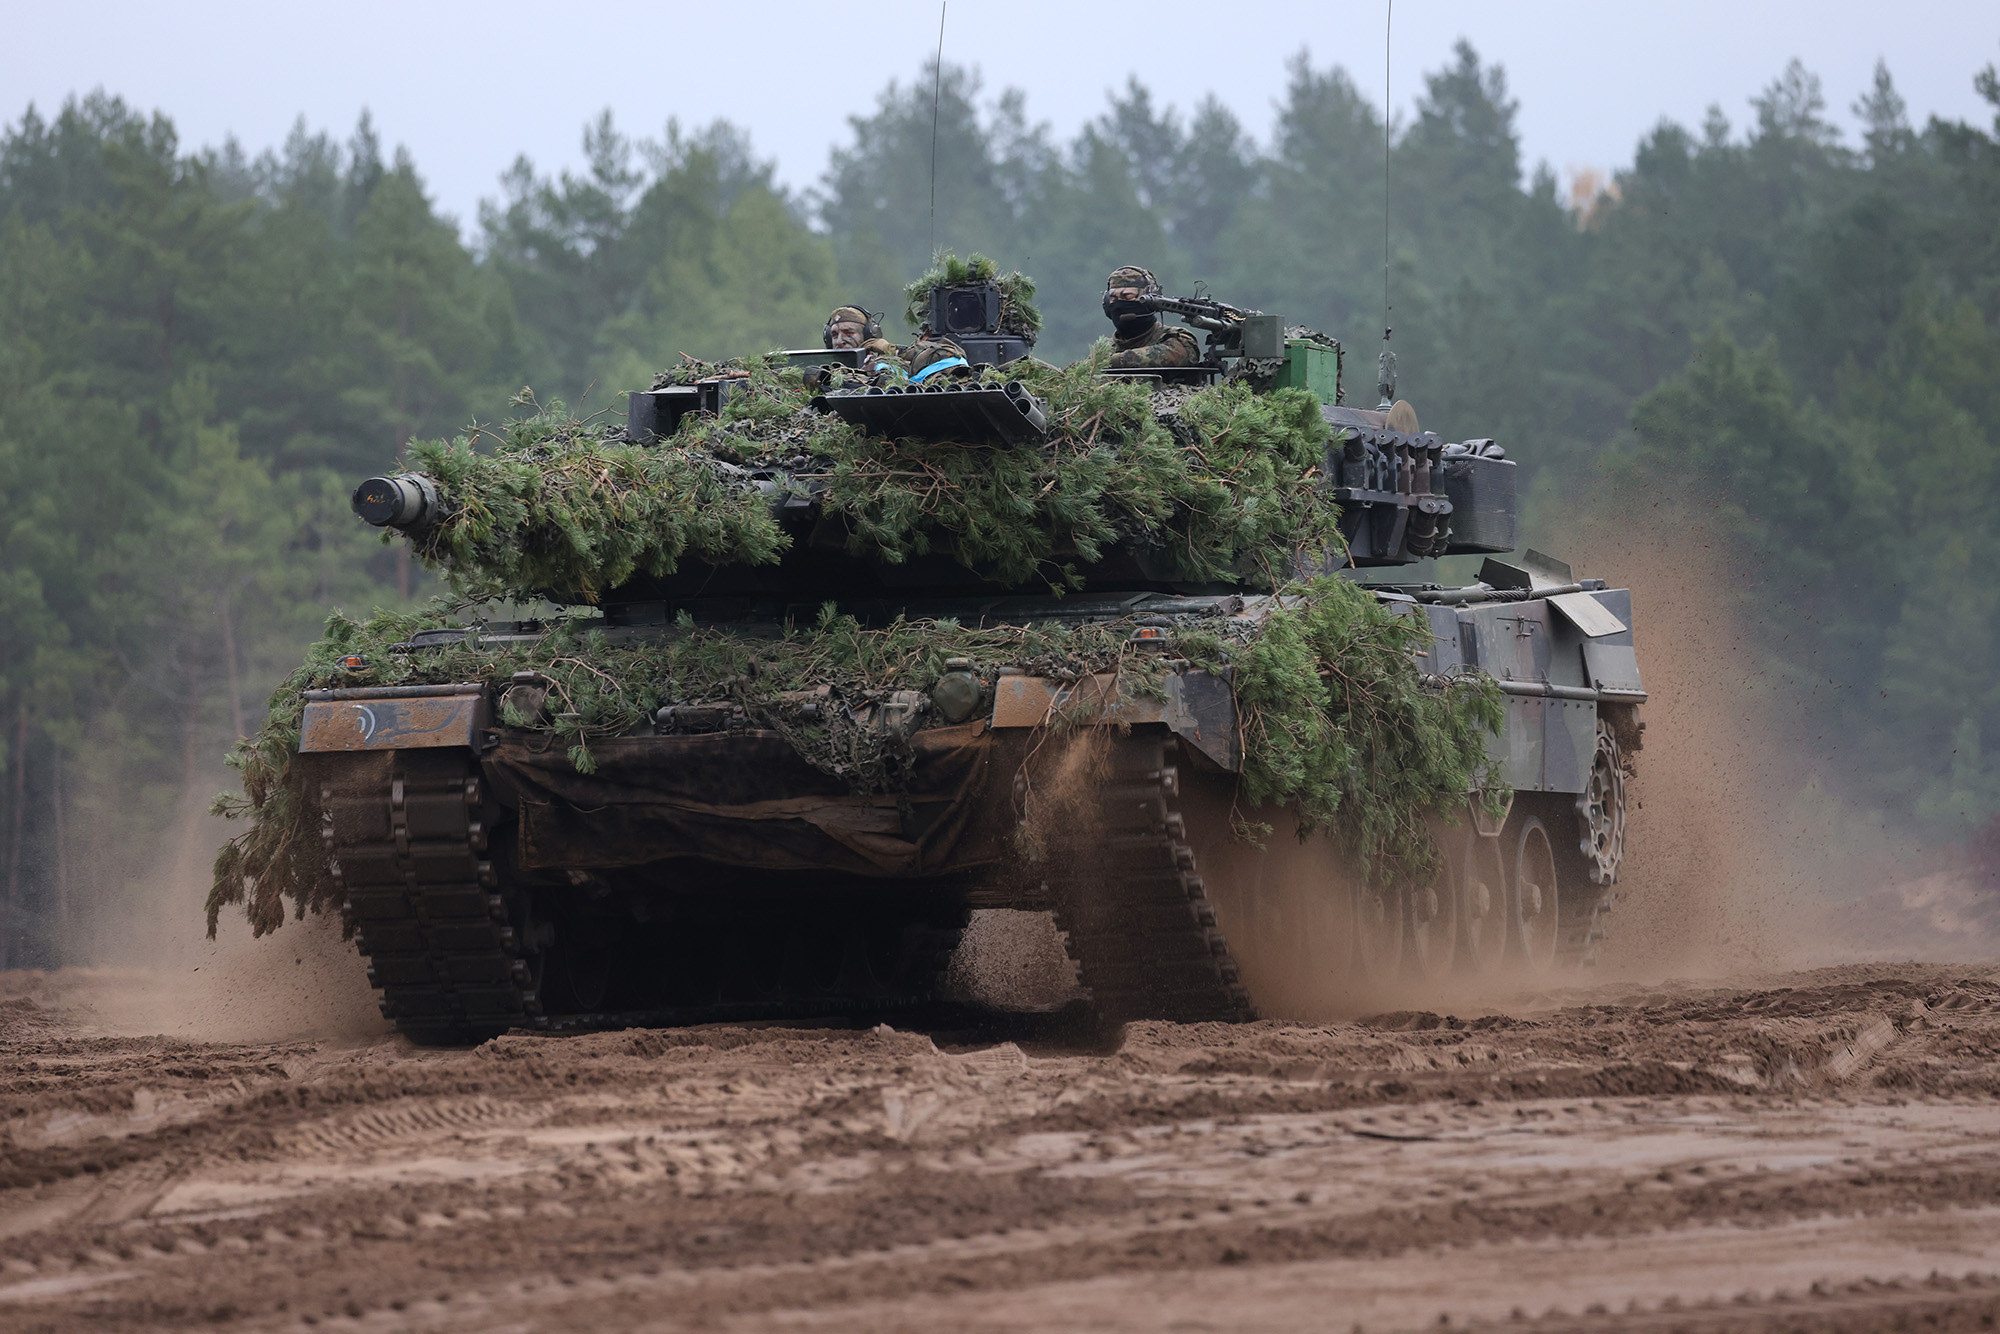 A German Bundeswehr Leopard 2A6 main battle tank participates in the NATO Iron Wolf military exercises on October 26, in Pabrade, Lithuania. 